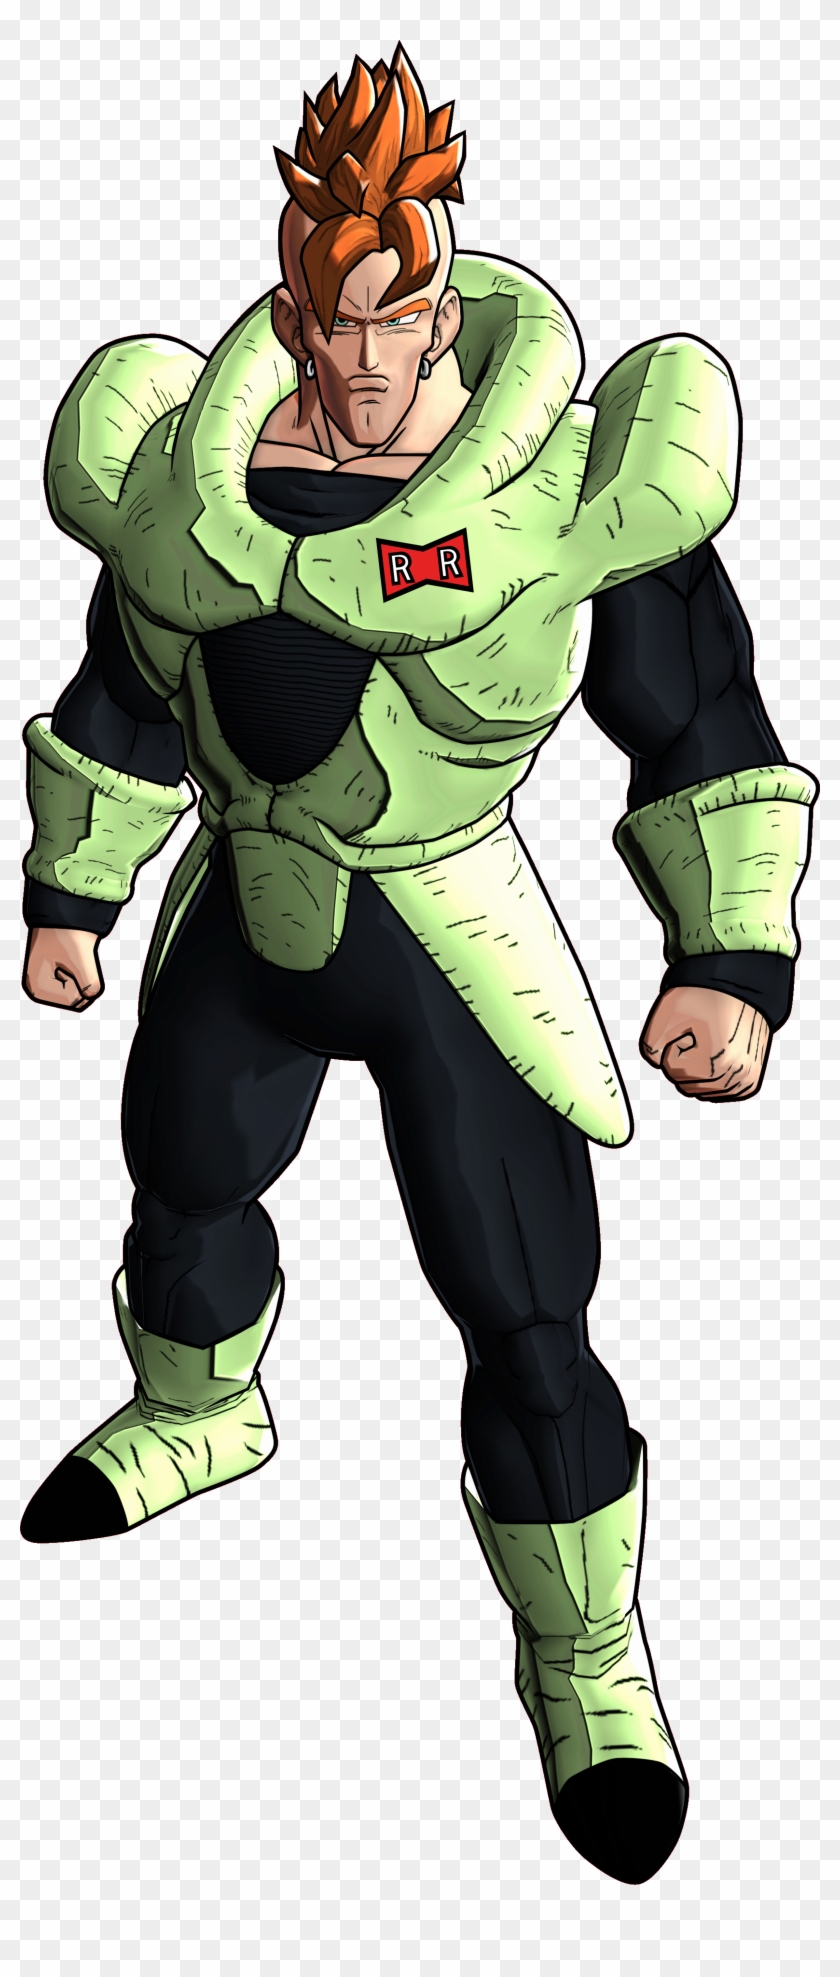 Android16 Battle Of Z Render - Dragon Ball Fighterz Render Clipart